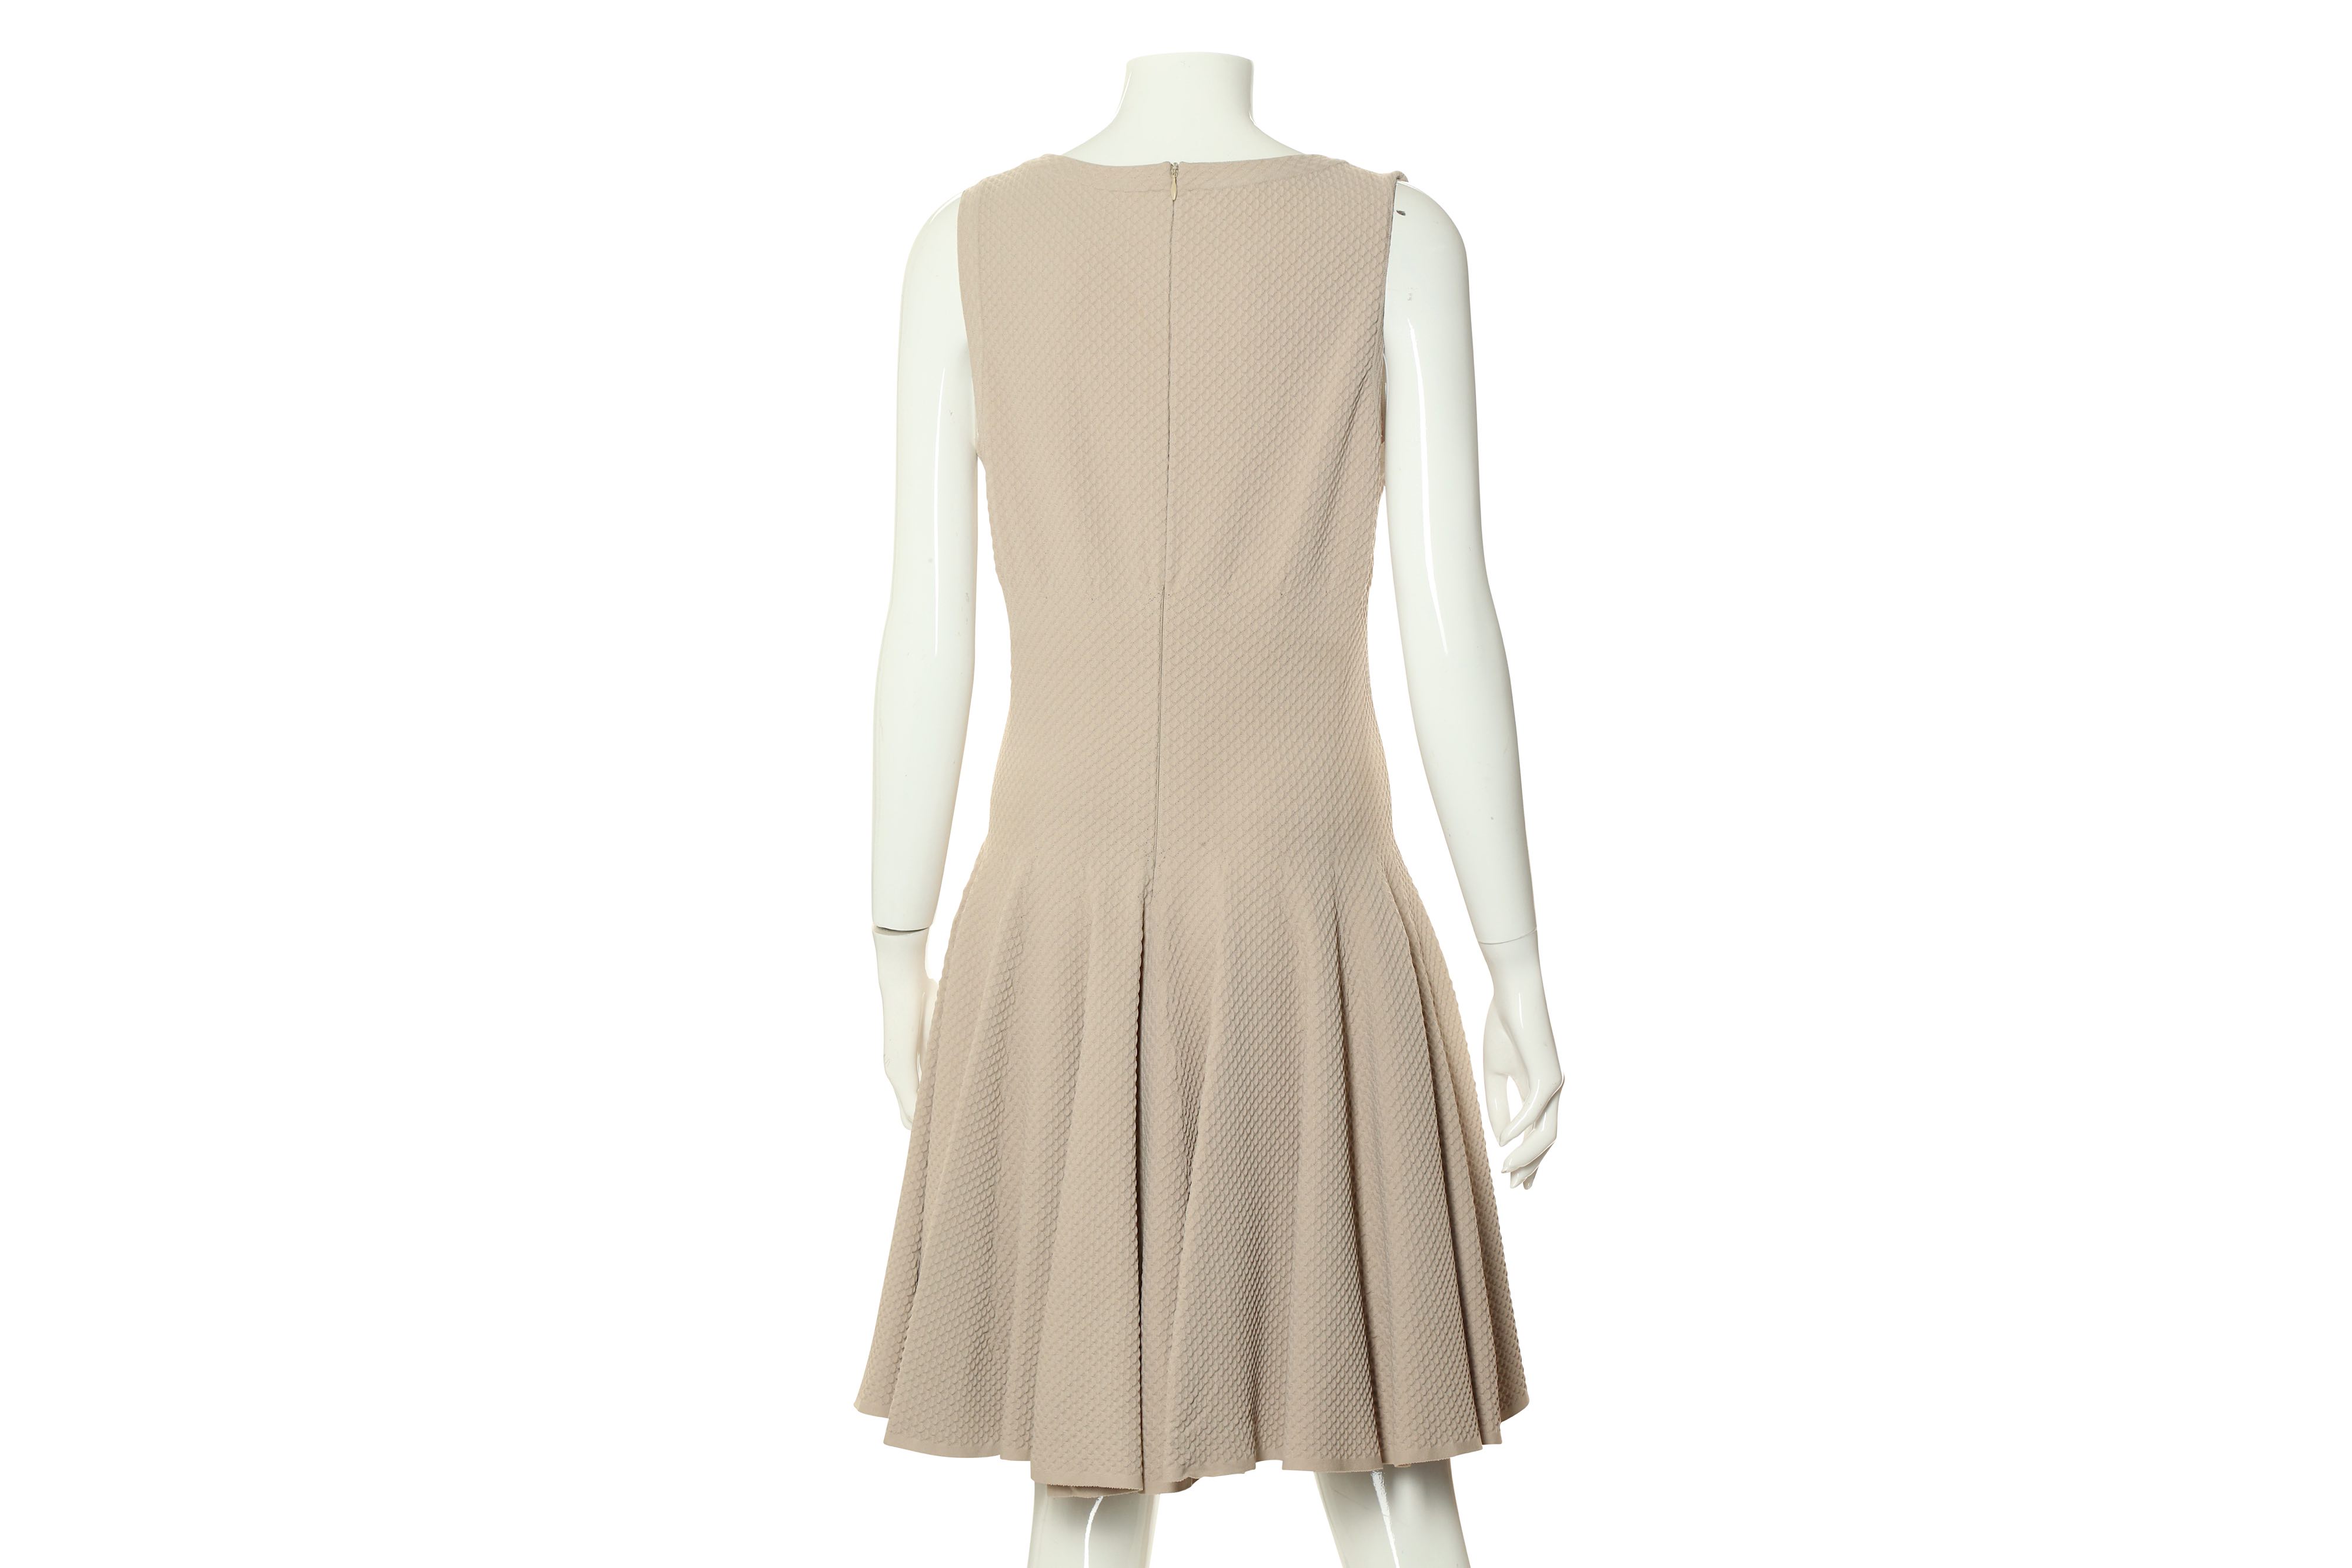 Alaia Taupe Stretch Dress and Jacket - sizes 42 and 44 - Image 5 of 7